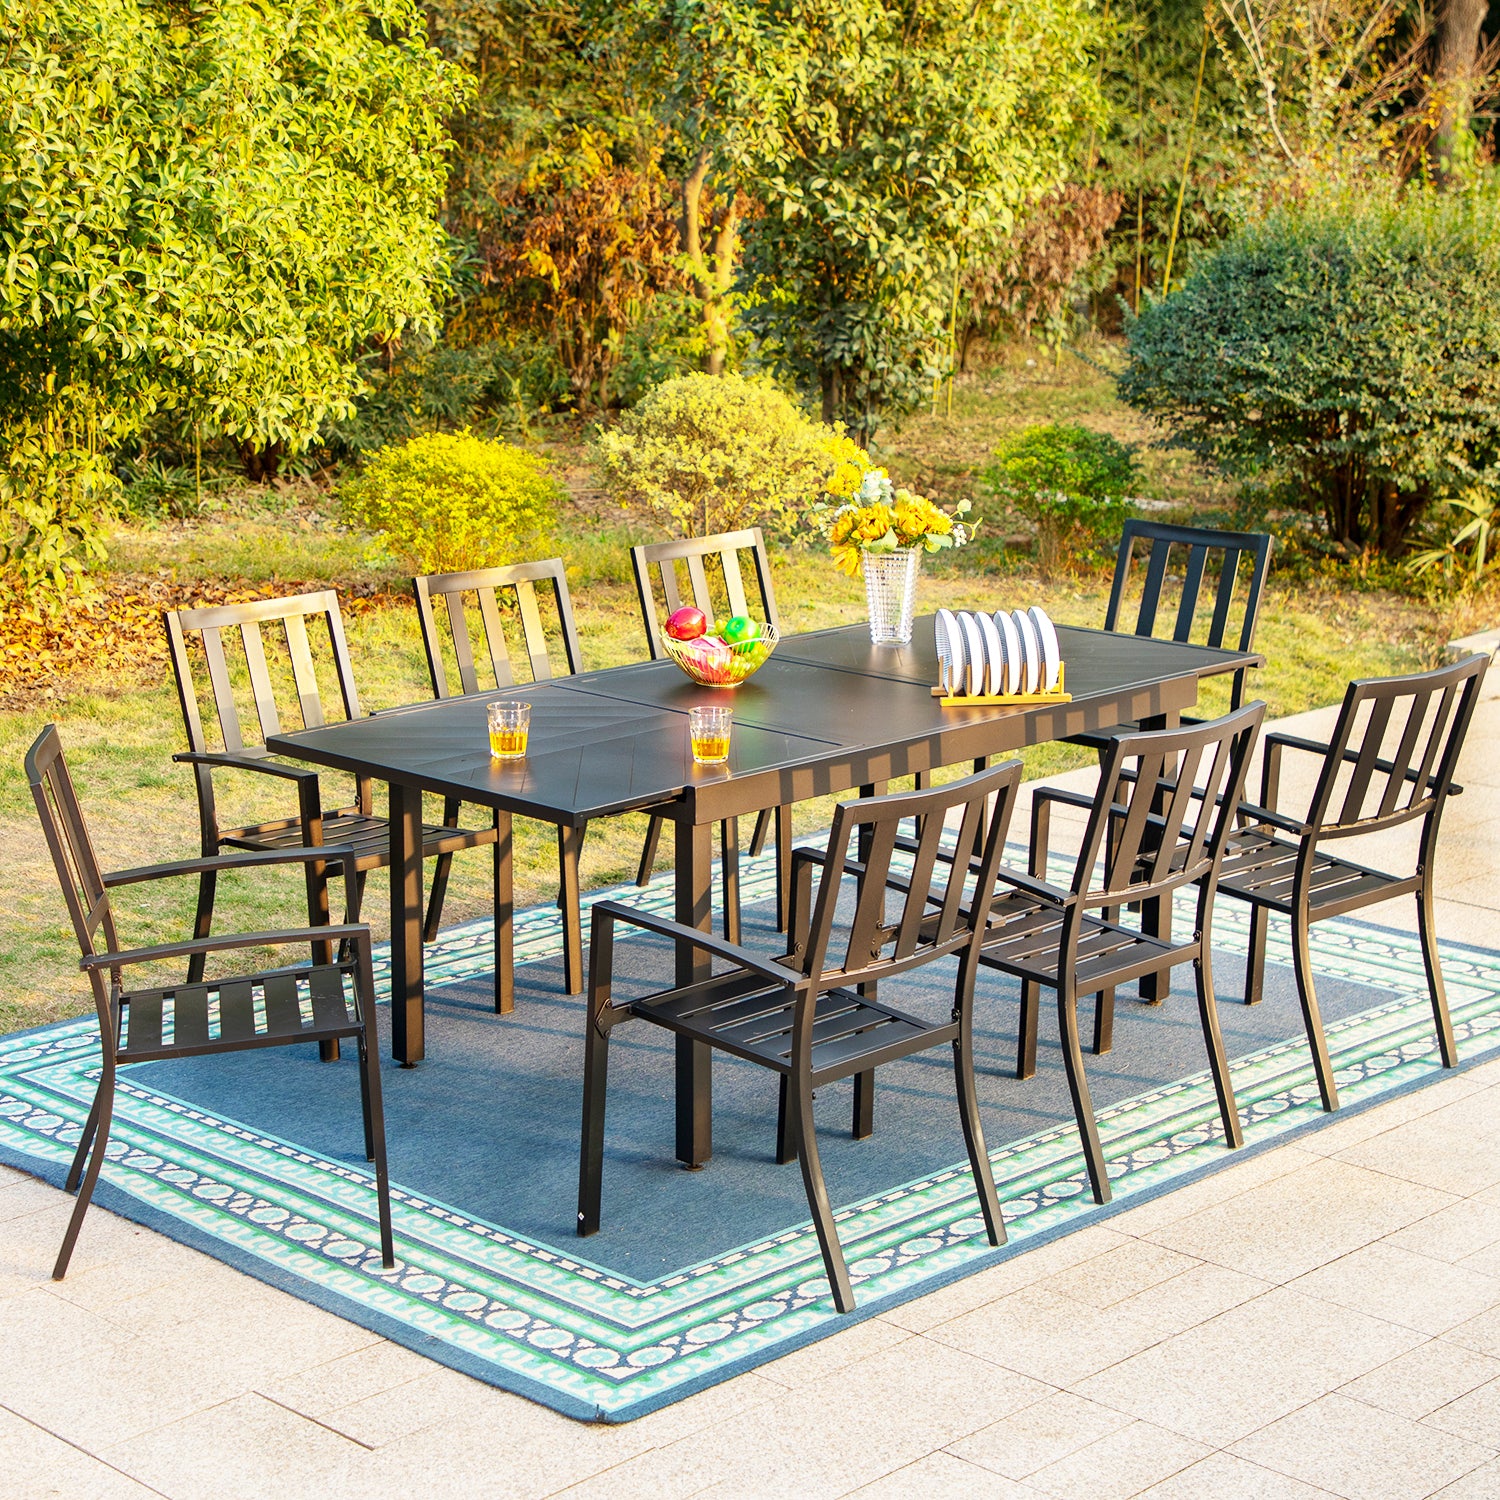 PHI VILLA 9-piece / 7-piece Patio Dining Sets Expandable Table and Classic Steel Chairs